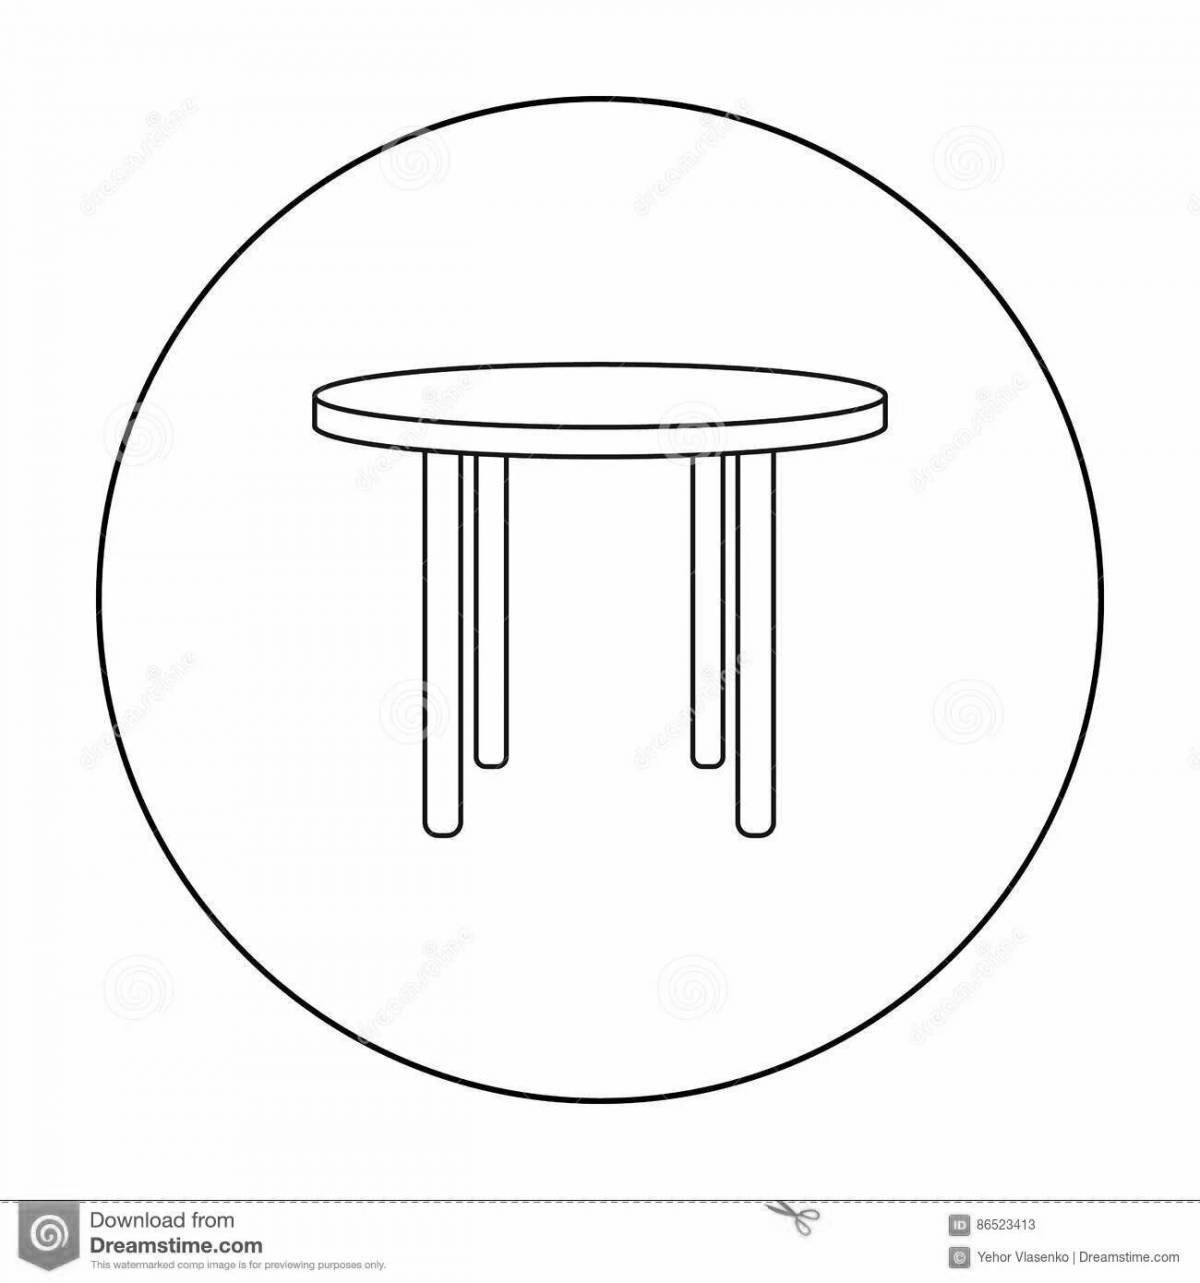 Bright round table coloring page